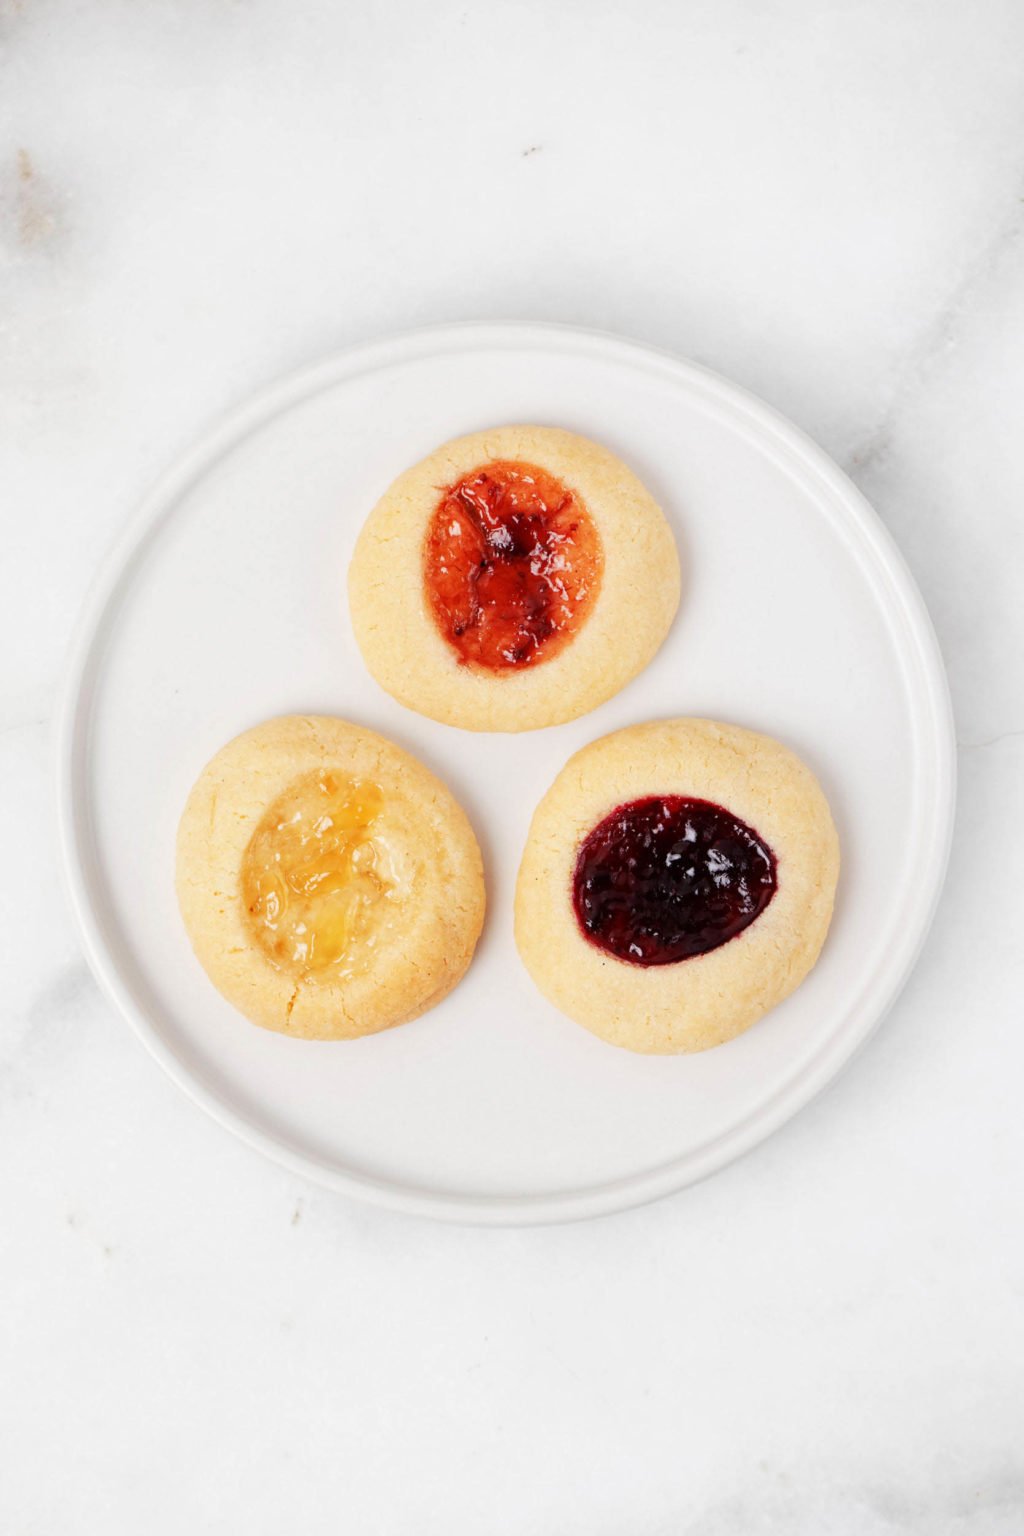 A round, rimmed dessert plate rests on a marble surface. It holds three jam filled sugar cookies.